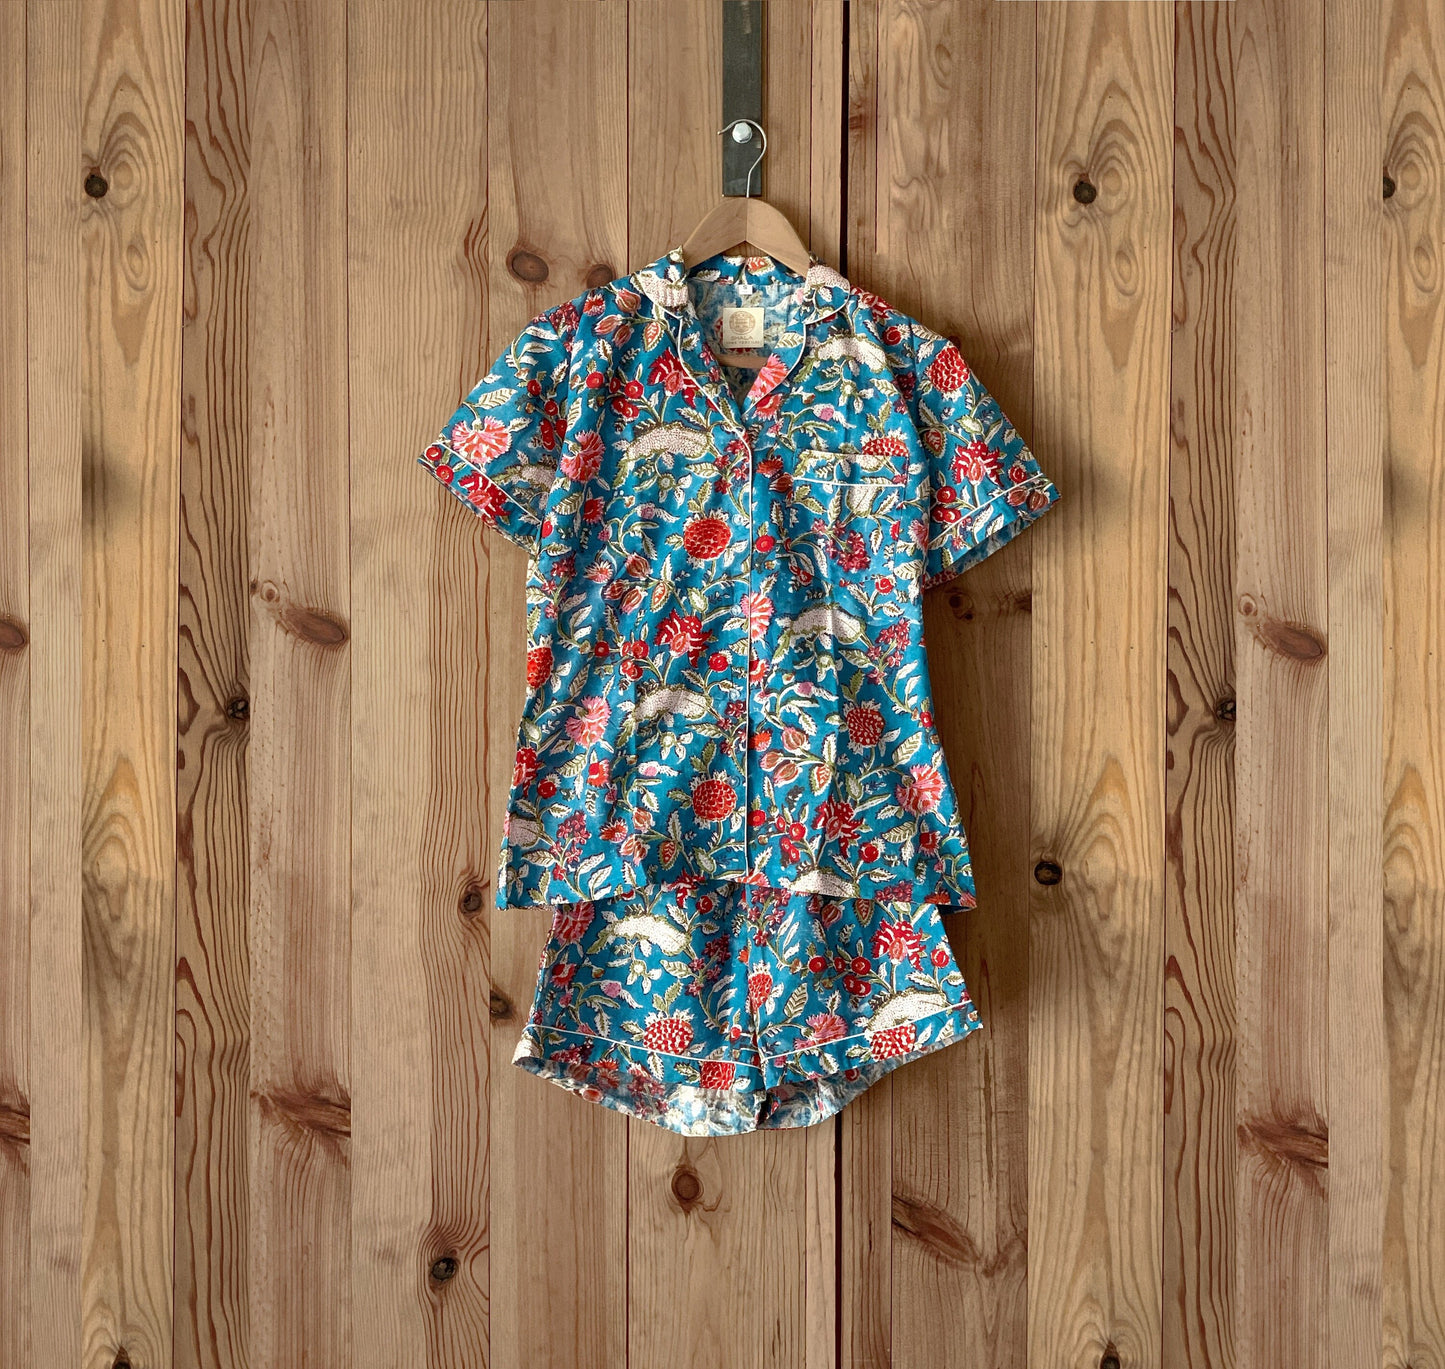 Short-sleeved and pants pajamas · Pure cotton block printed in India · 100% cotton summer pajamas · Blue red flowers